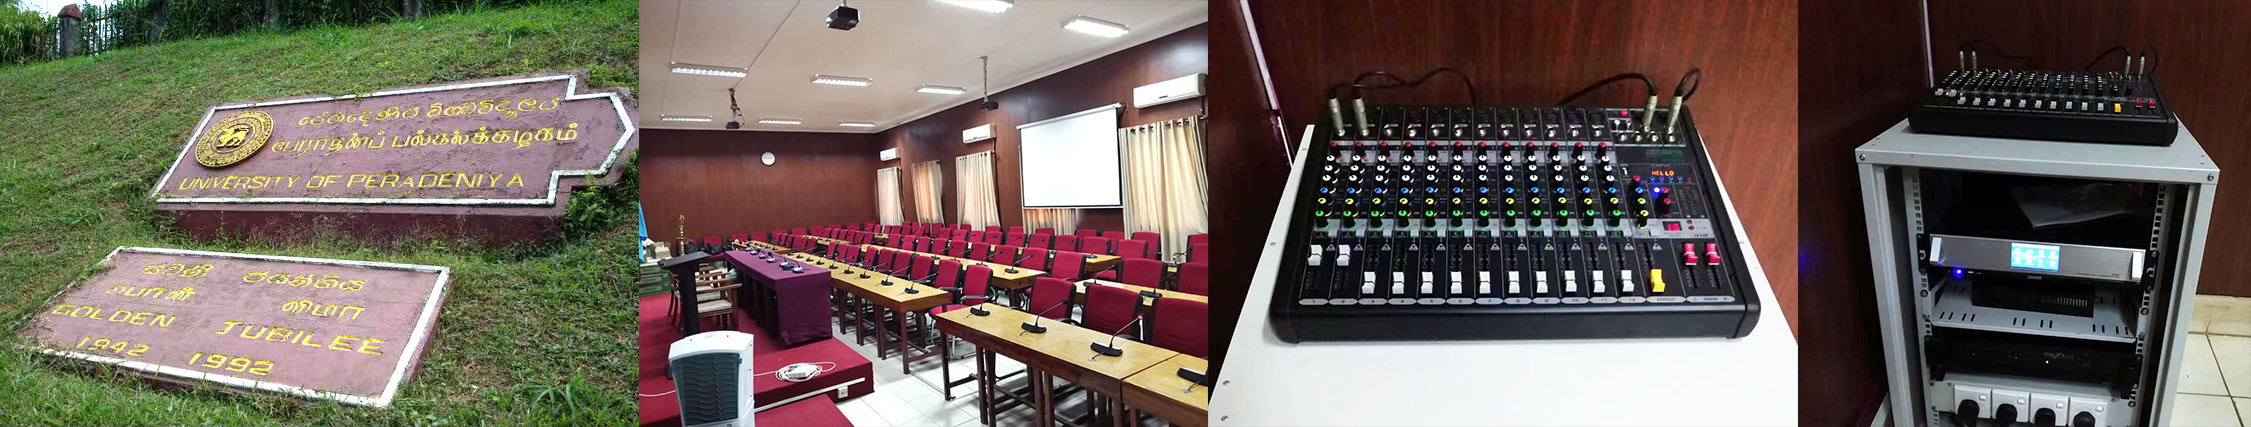 mic-and-speaker-system-for-video-conferencing.jpg